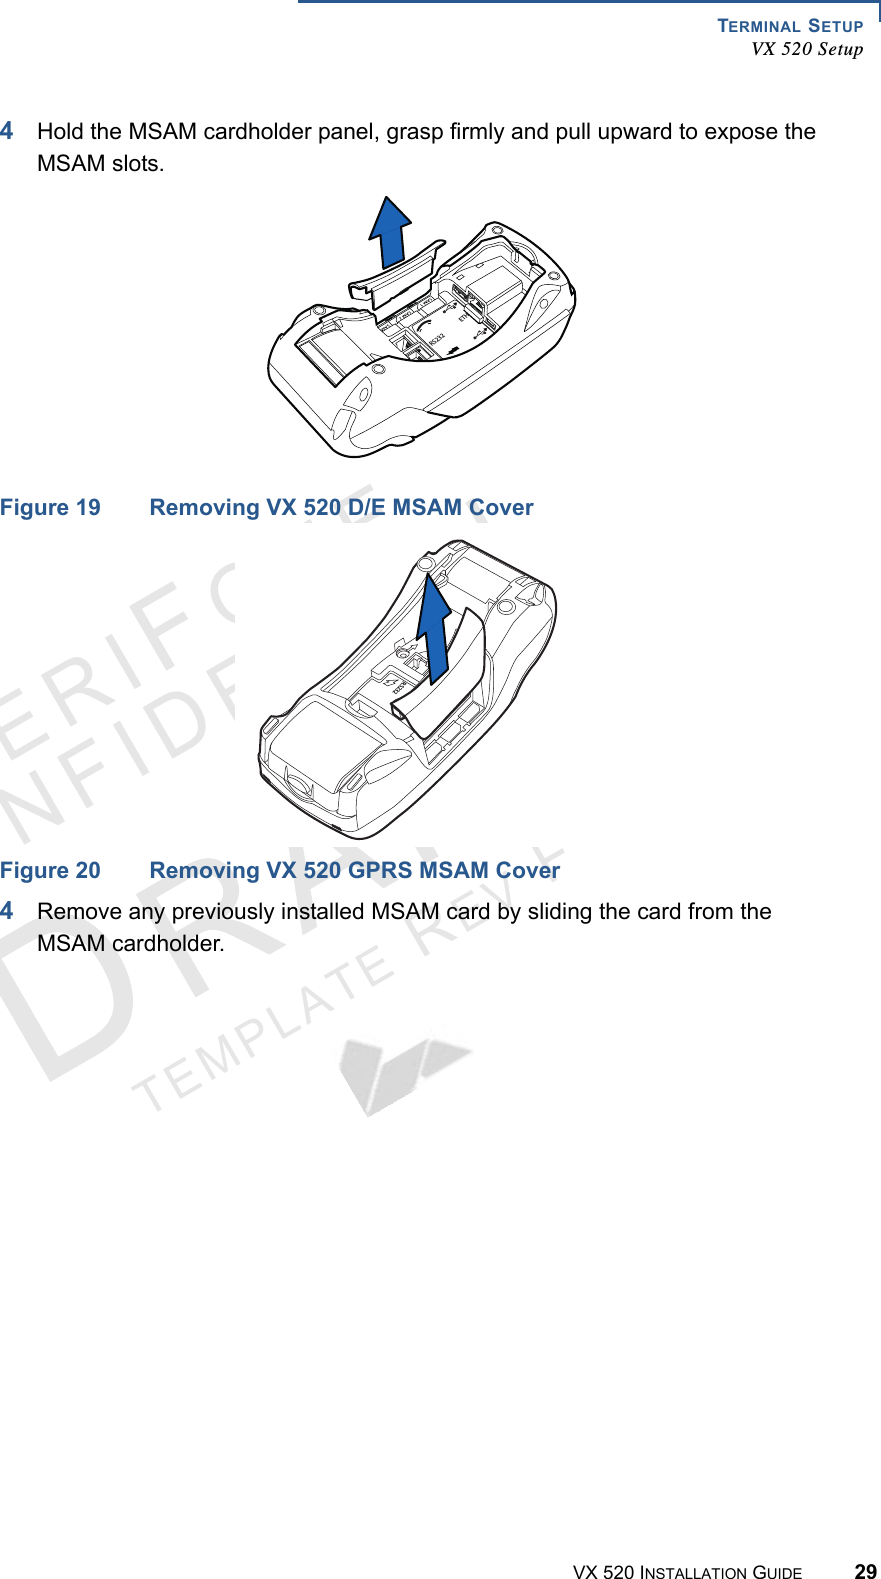 TERMINAL SETUPVX 520 SetupVX 520 INSTALLATION GUIDE 29VERIFO N ECONF I DENTIALTEMPLATE REV F 4Hold the MSAM cardholder panel, grasp firmly and pull upward to expose the MSAM slots.Figure 19 Removing VX 520 D/E MSAM CoverFigure 20 Removing VX 520 GPRS MSAM Cover4Remove any previously installed MSAM card by sliding the card from the MSAM cardholder.23%4(23